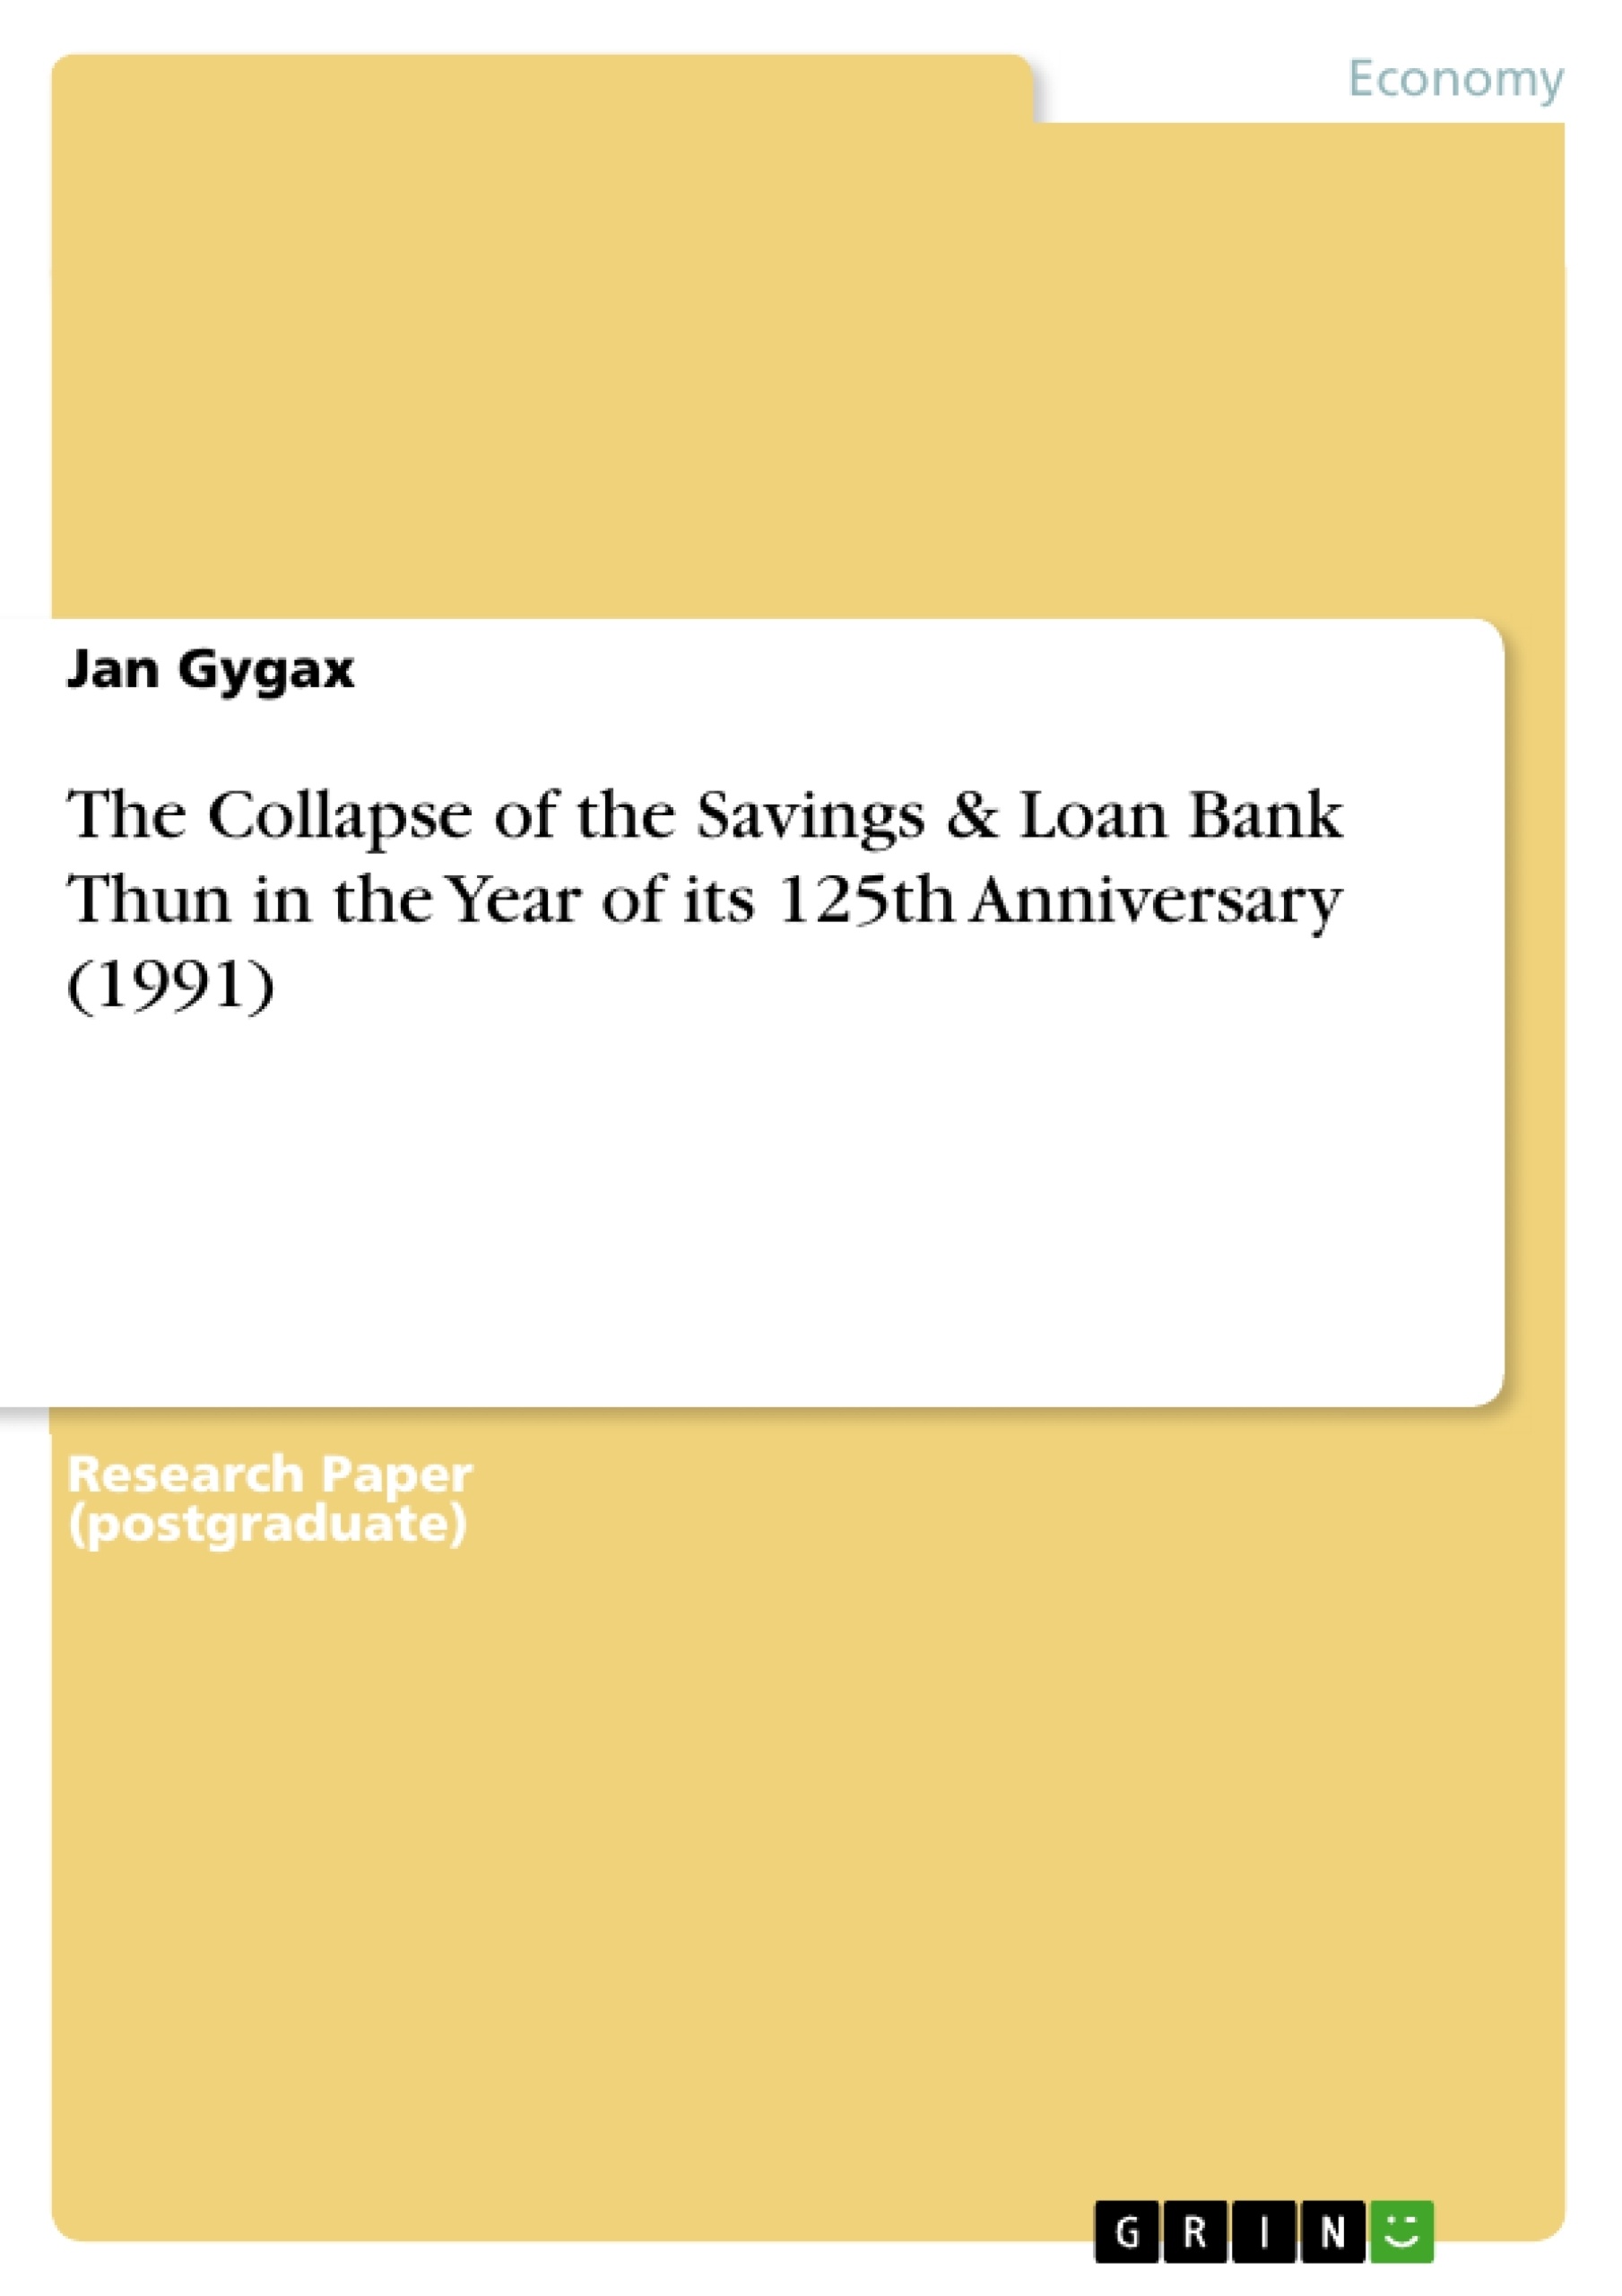 Titre: The Collapse of the Savings & Loan Bank Thun in the Year of its 125th Anniversary (1991)